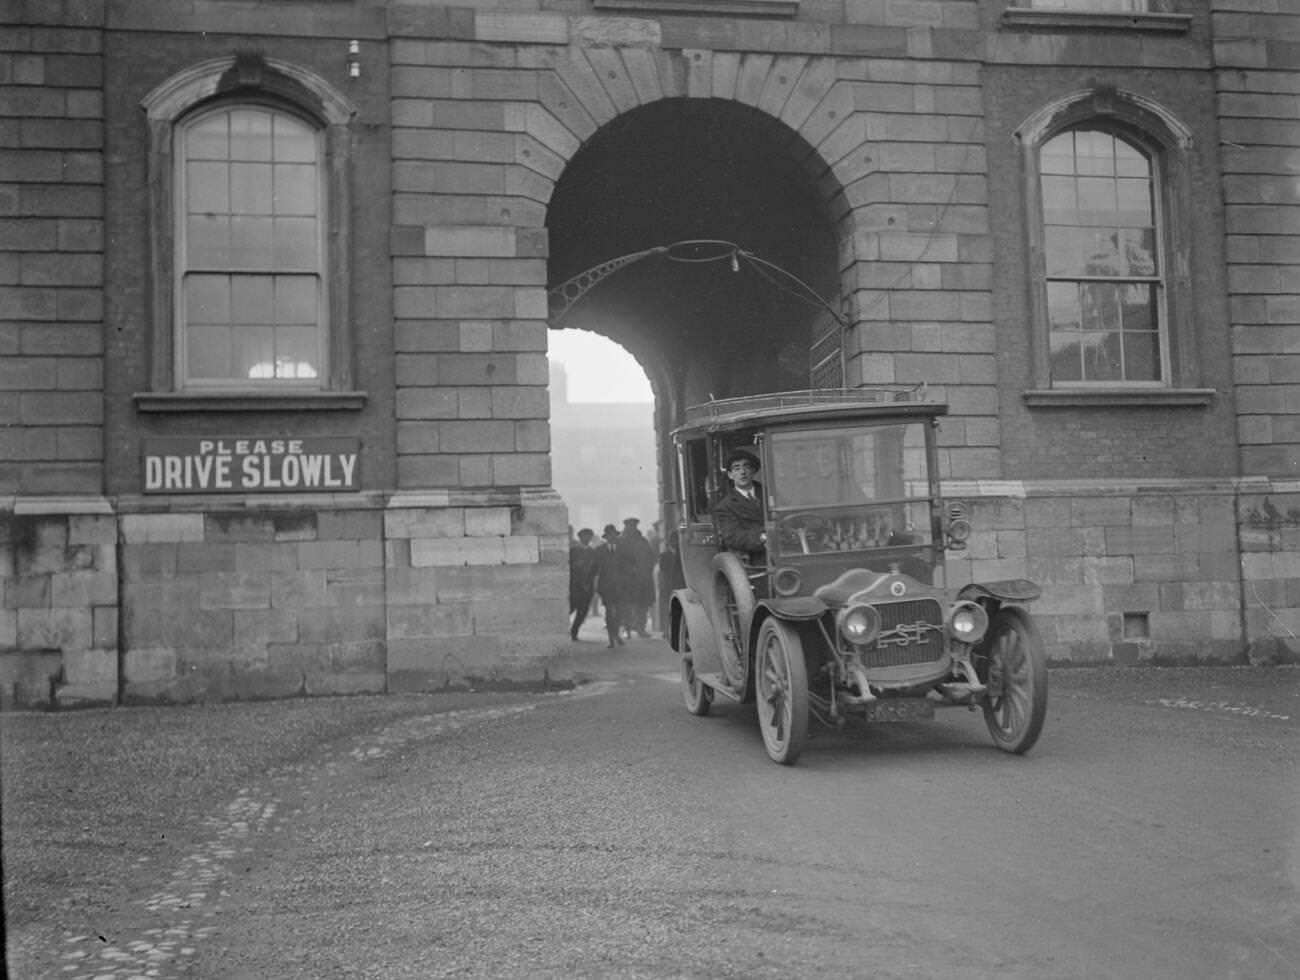 The Provisional Government of Southern Ireland takes over control of Dublin Castle with the car containing Mr Michael Collins passing through the arch, 1922.